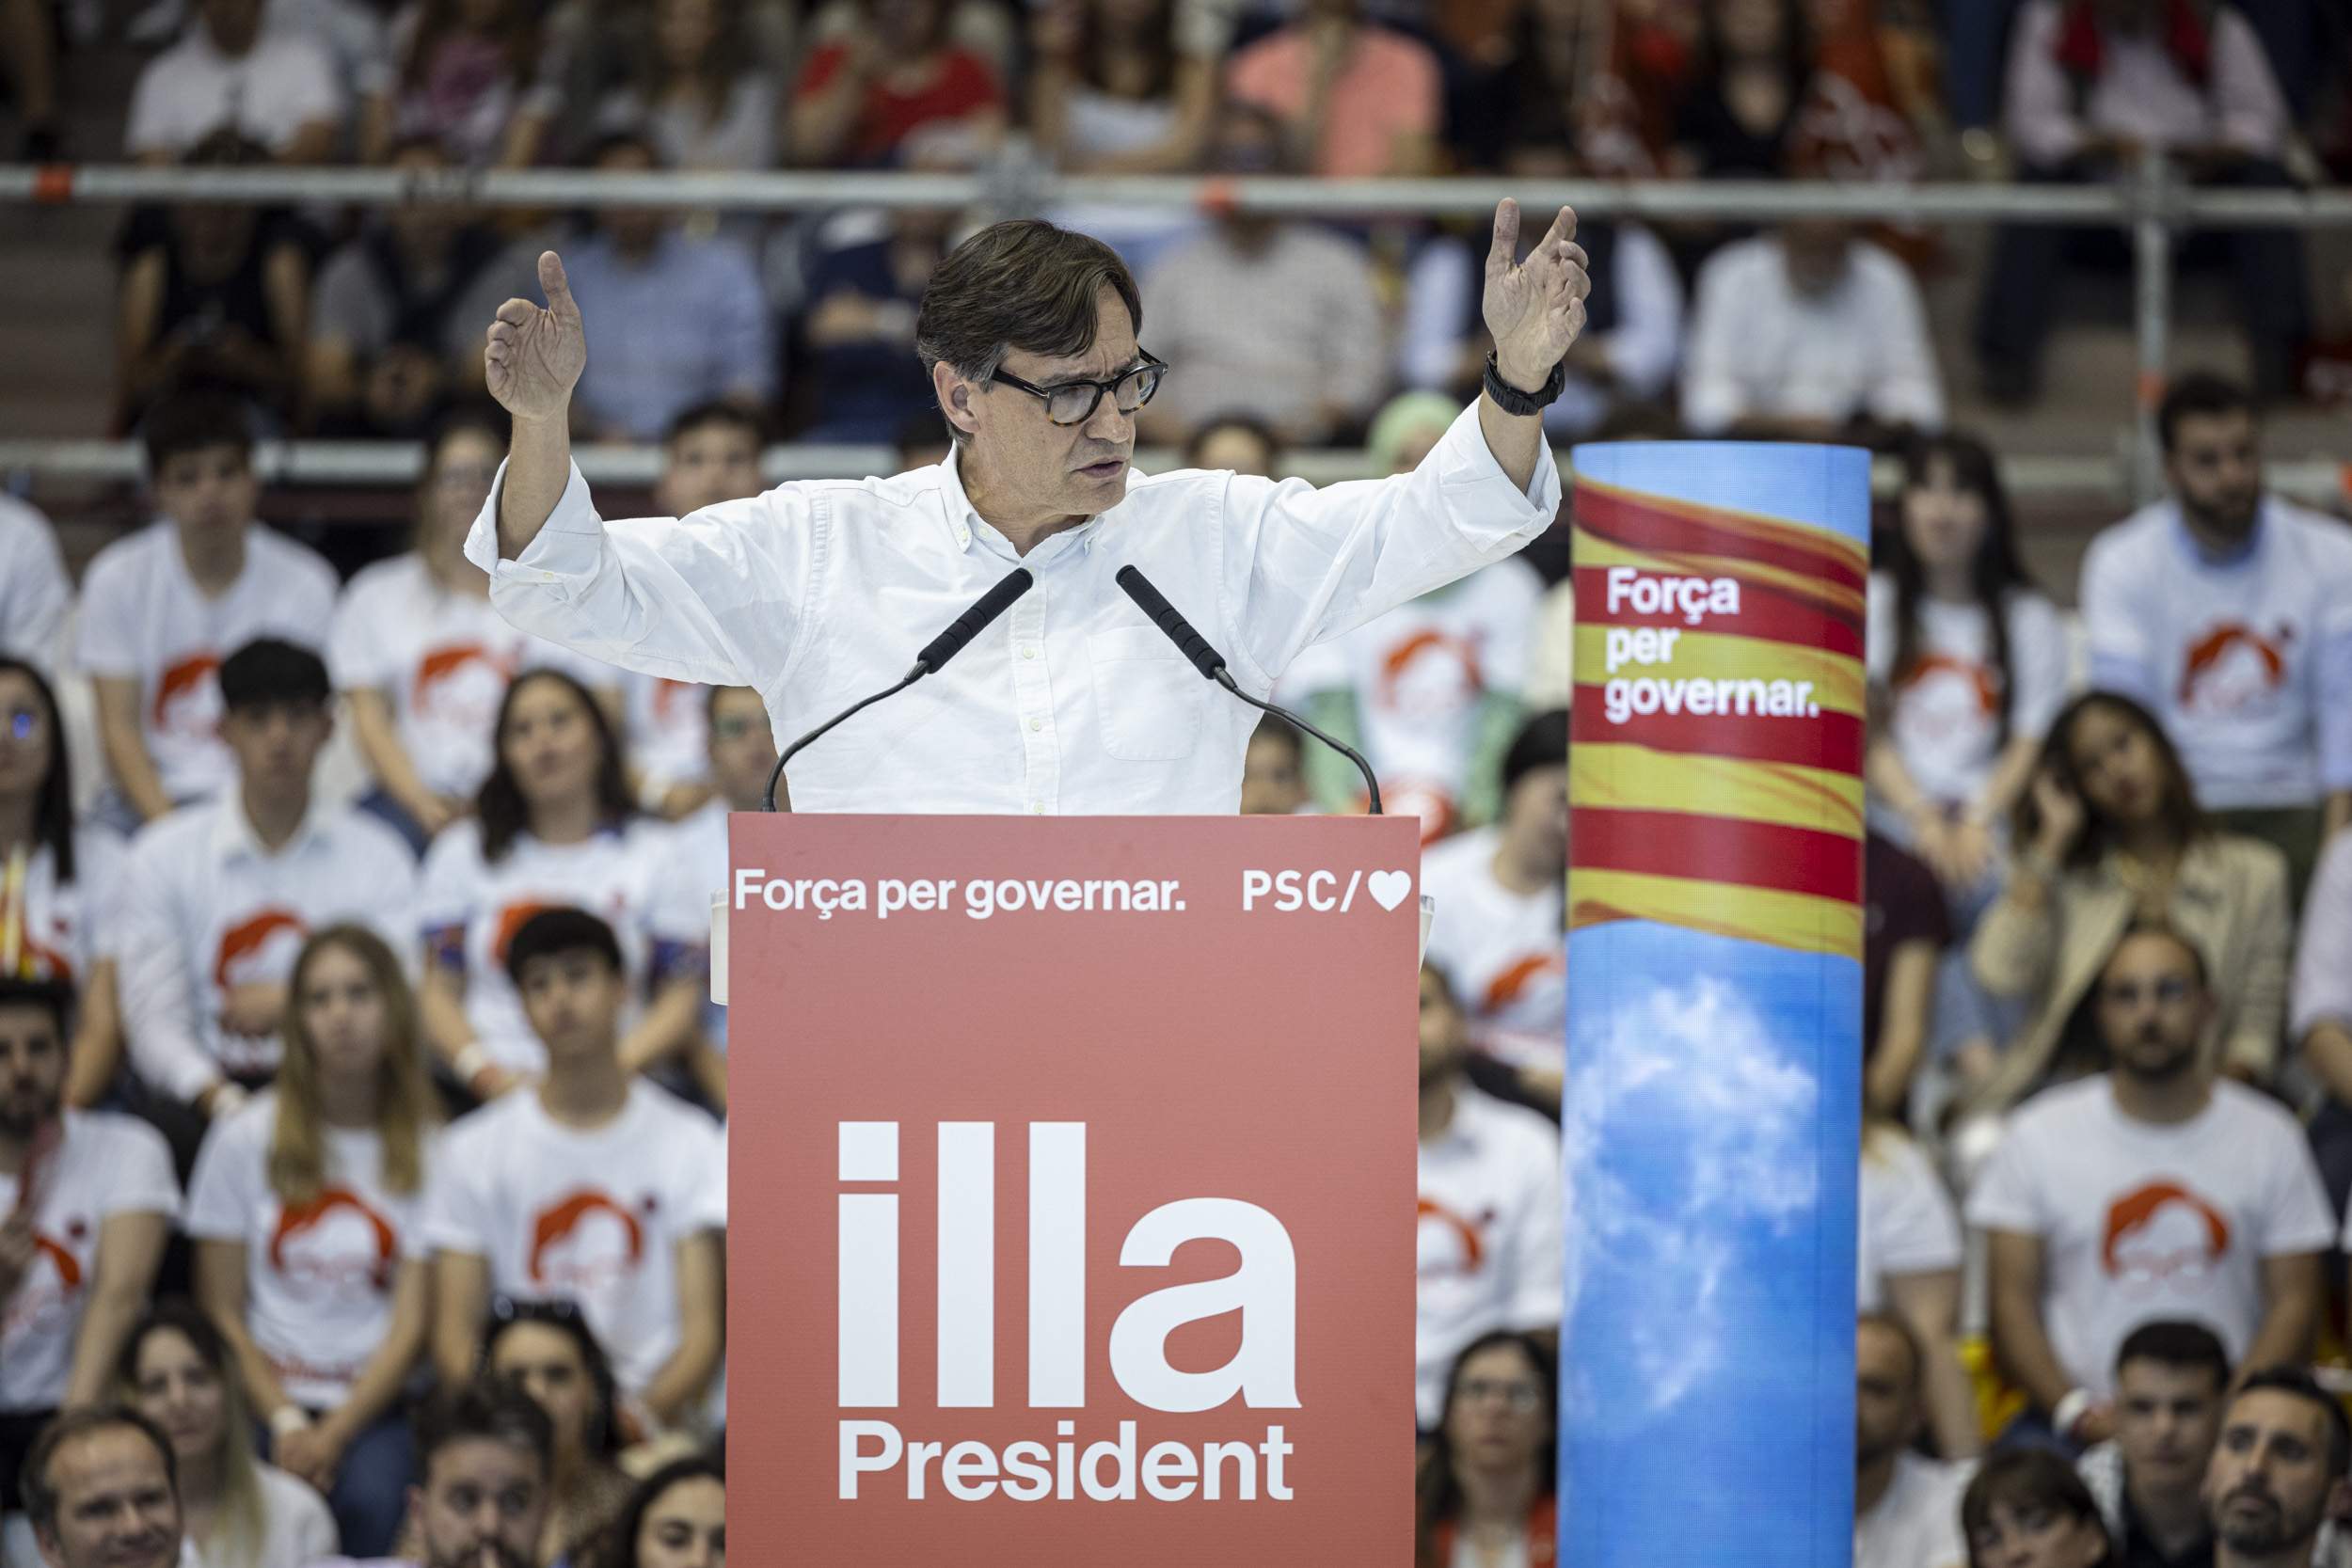 Salvador Illa won't discard accepting PP votes to rule Catalonia, although he'd prefer leftist help